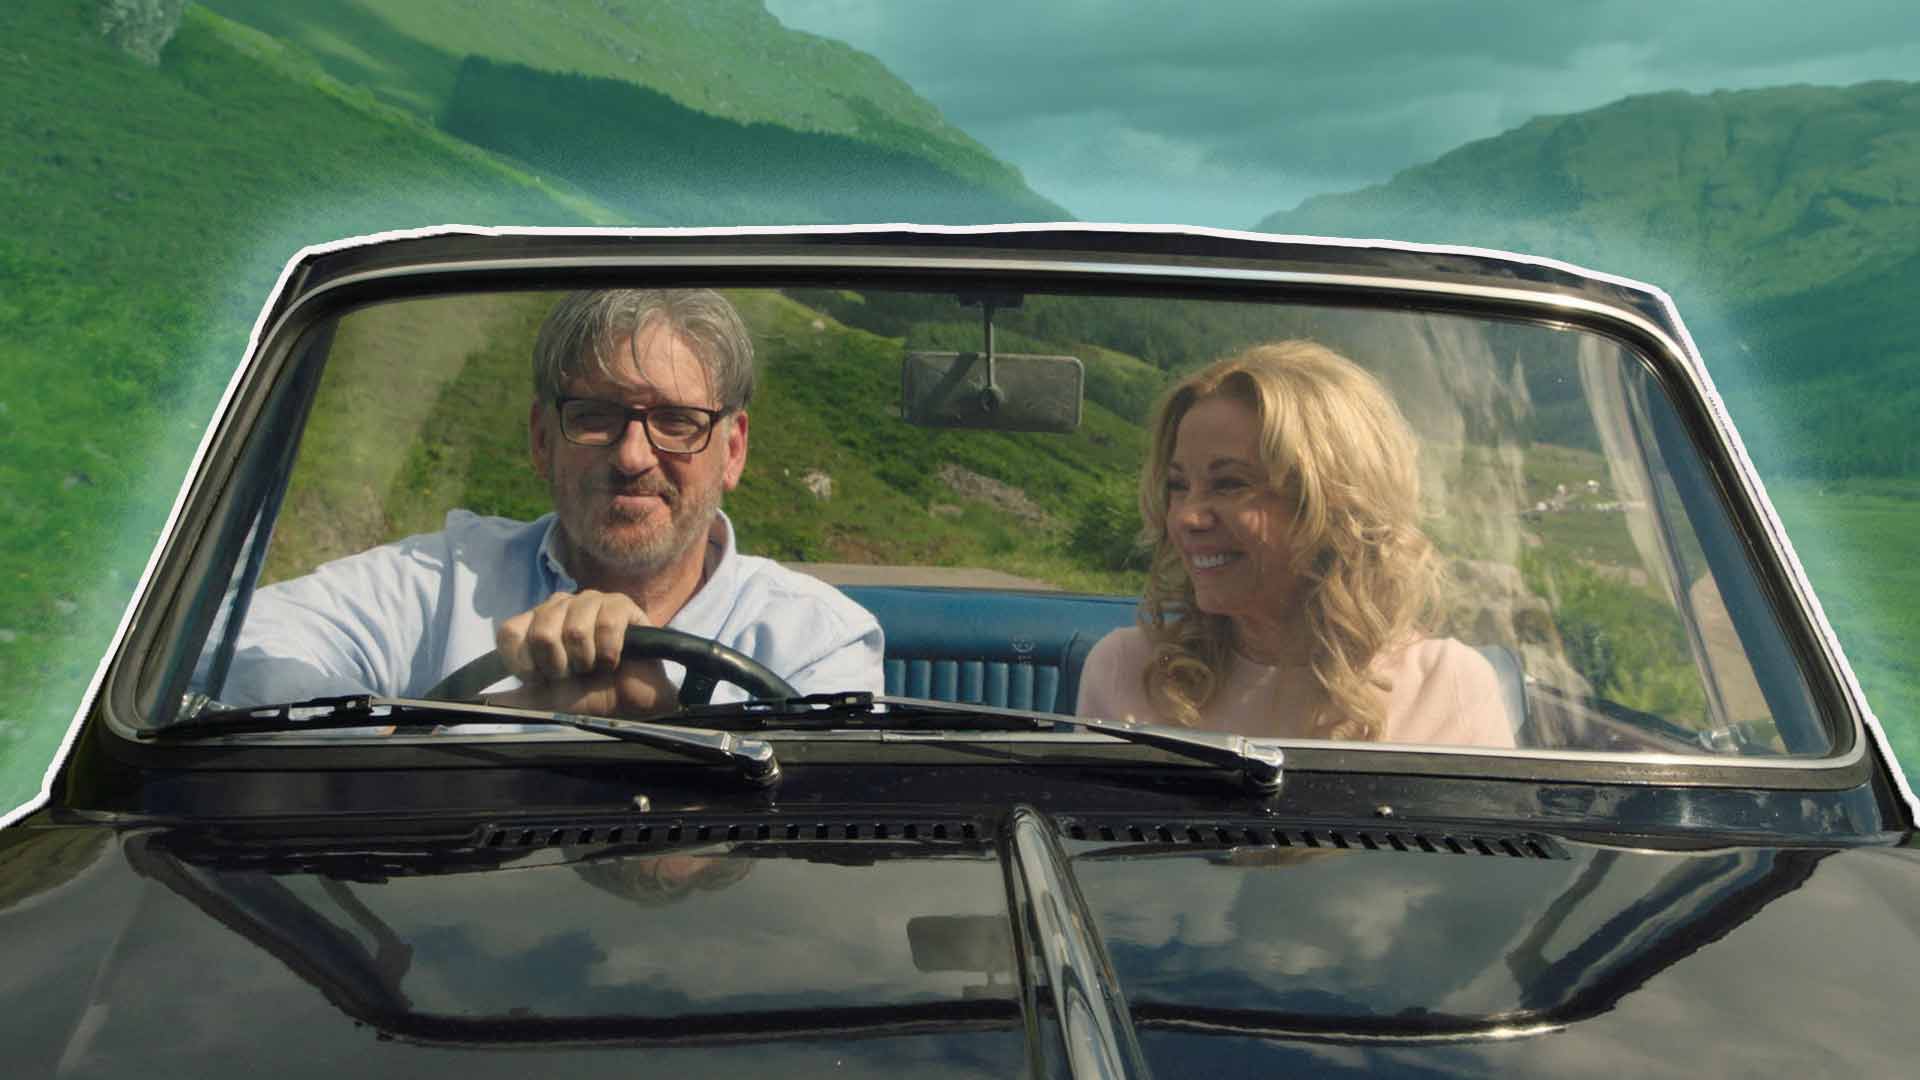 Kathie Lee Gifford and Craig Ferguson Drive in a car during a scene in the Then Came You movie trailer